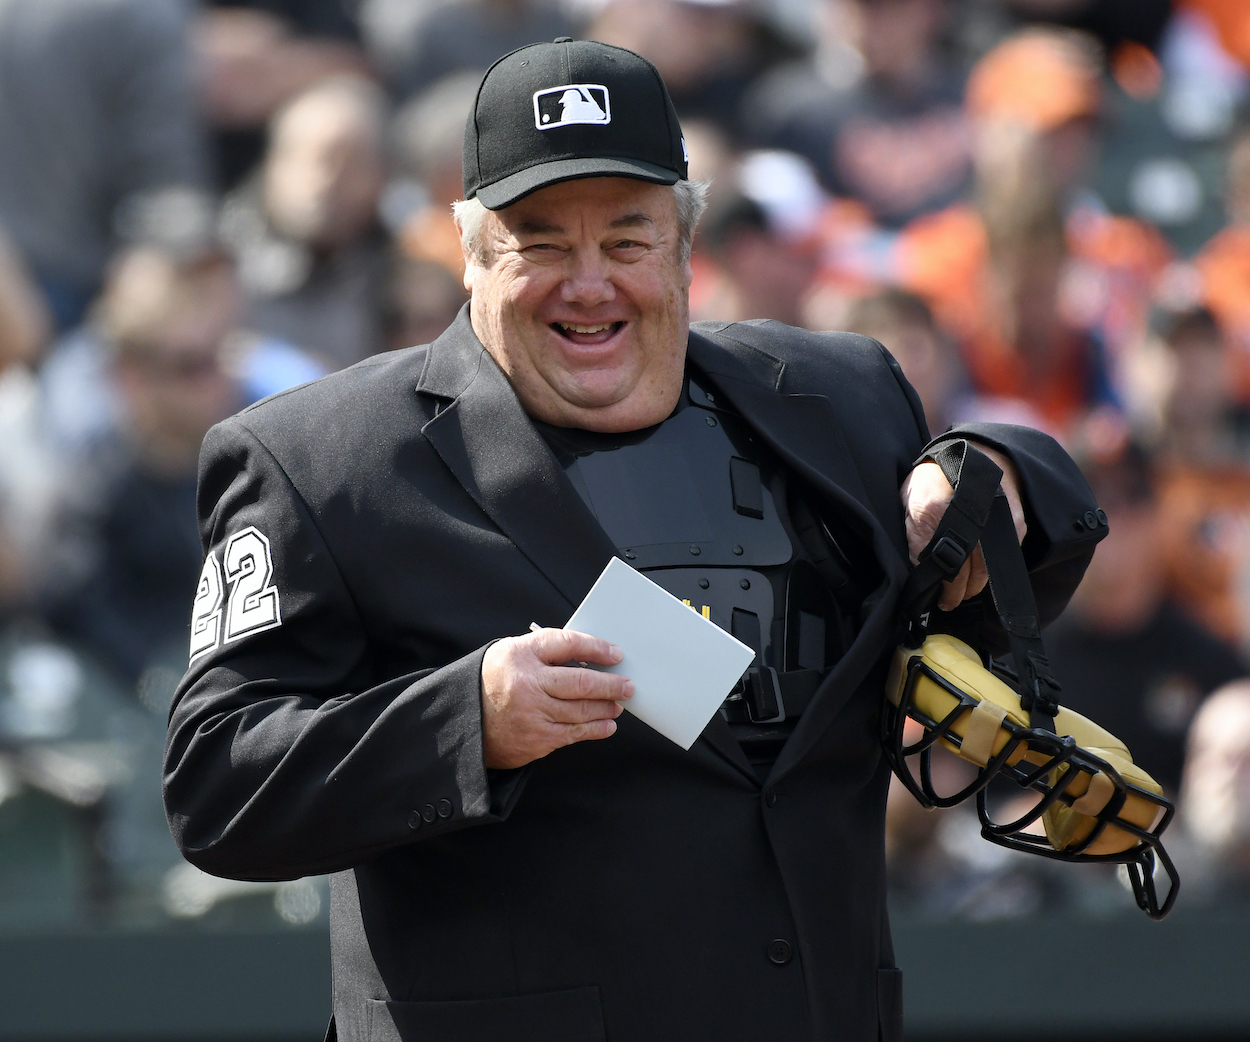 Hated MLB Umpire Joe West Woke Up $500,000 Richer Thanks to a Former Catcher’s White Lie